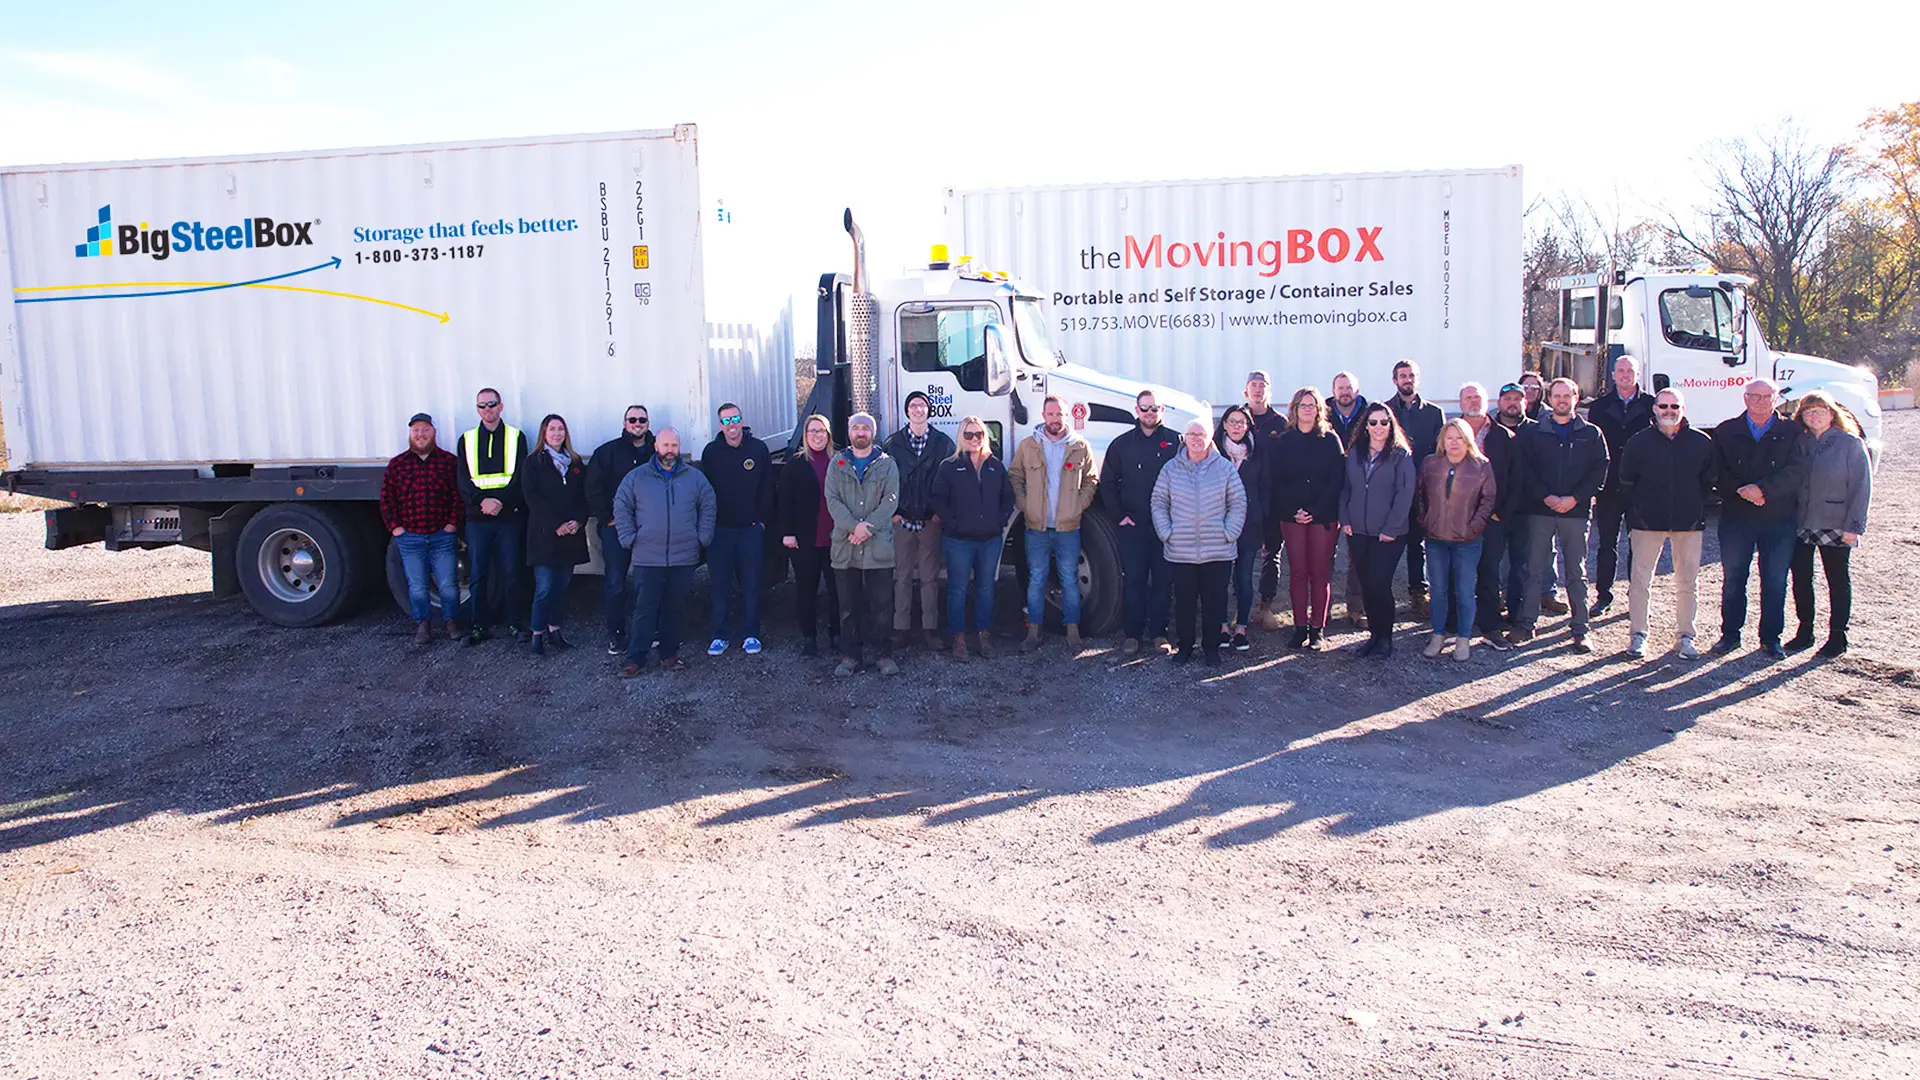 The Moving Box and BigSteelBox Staff